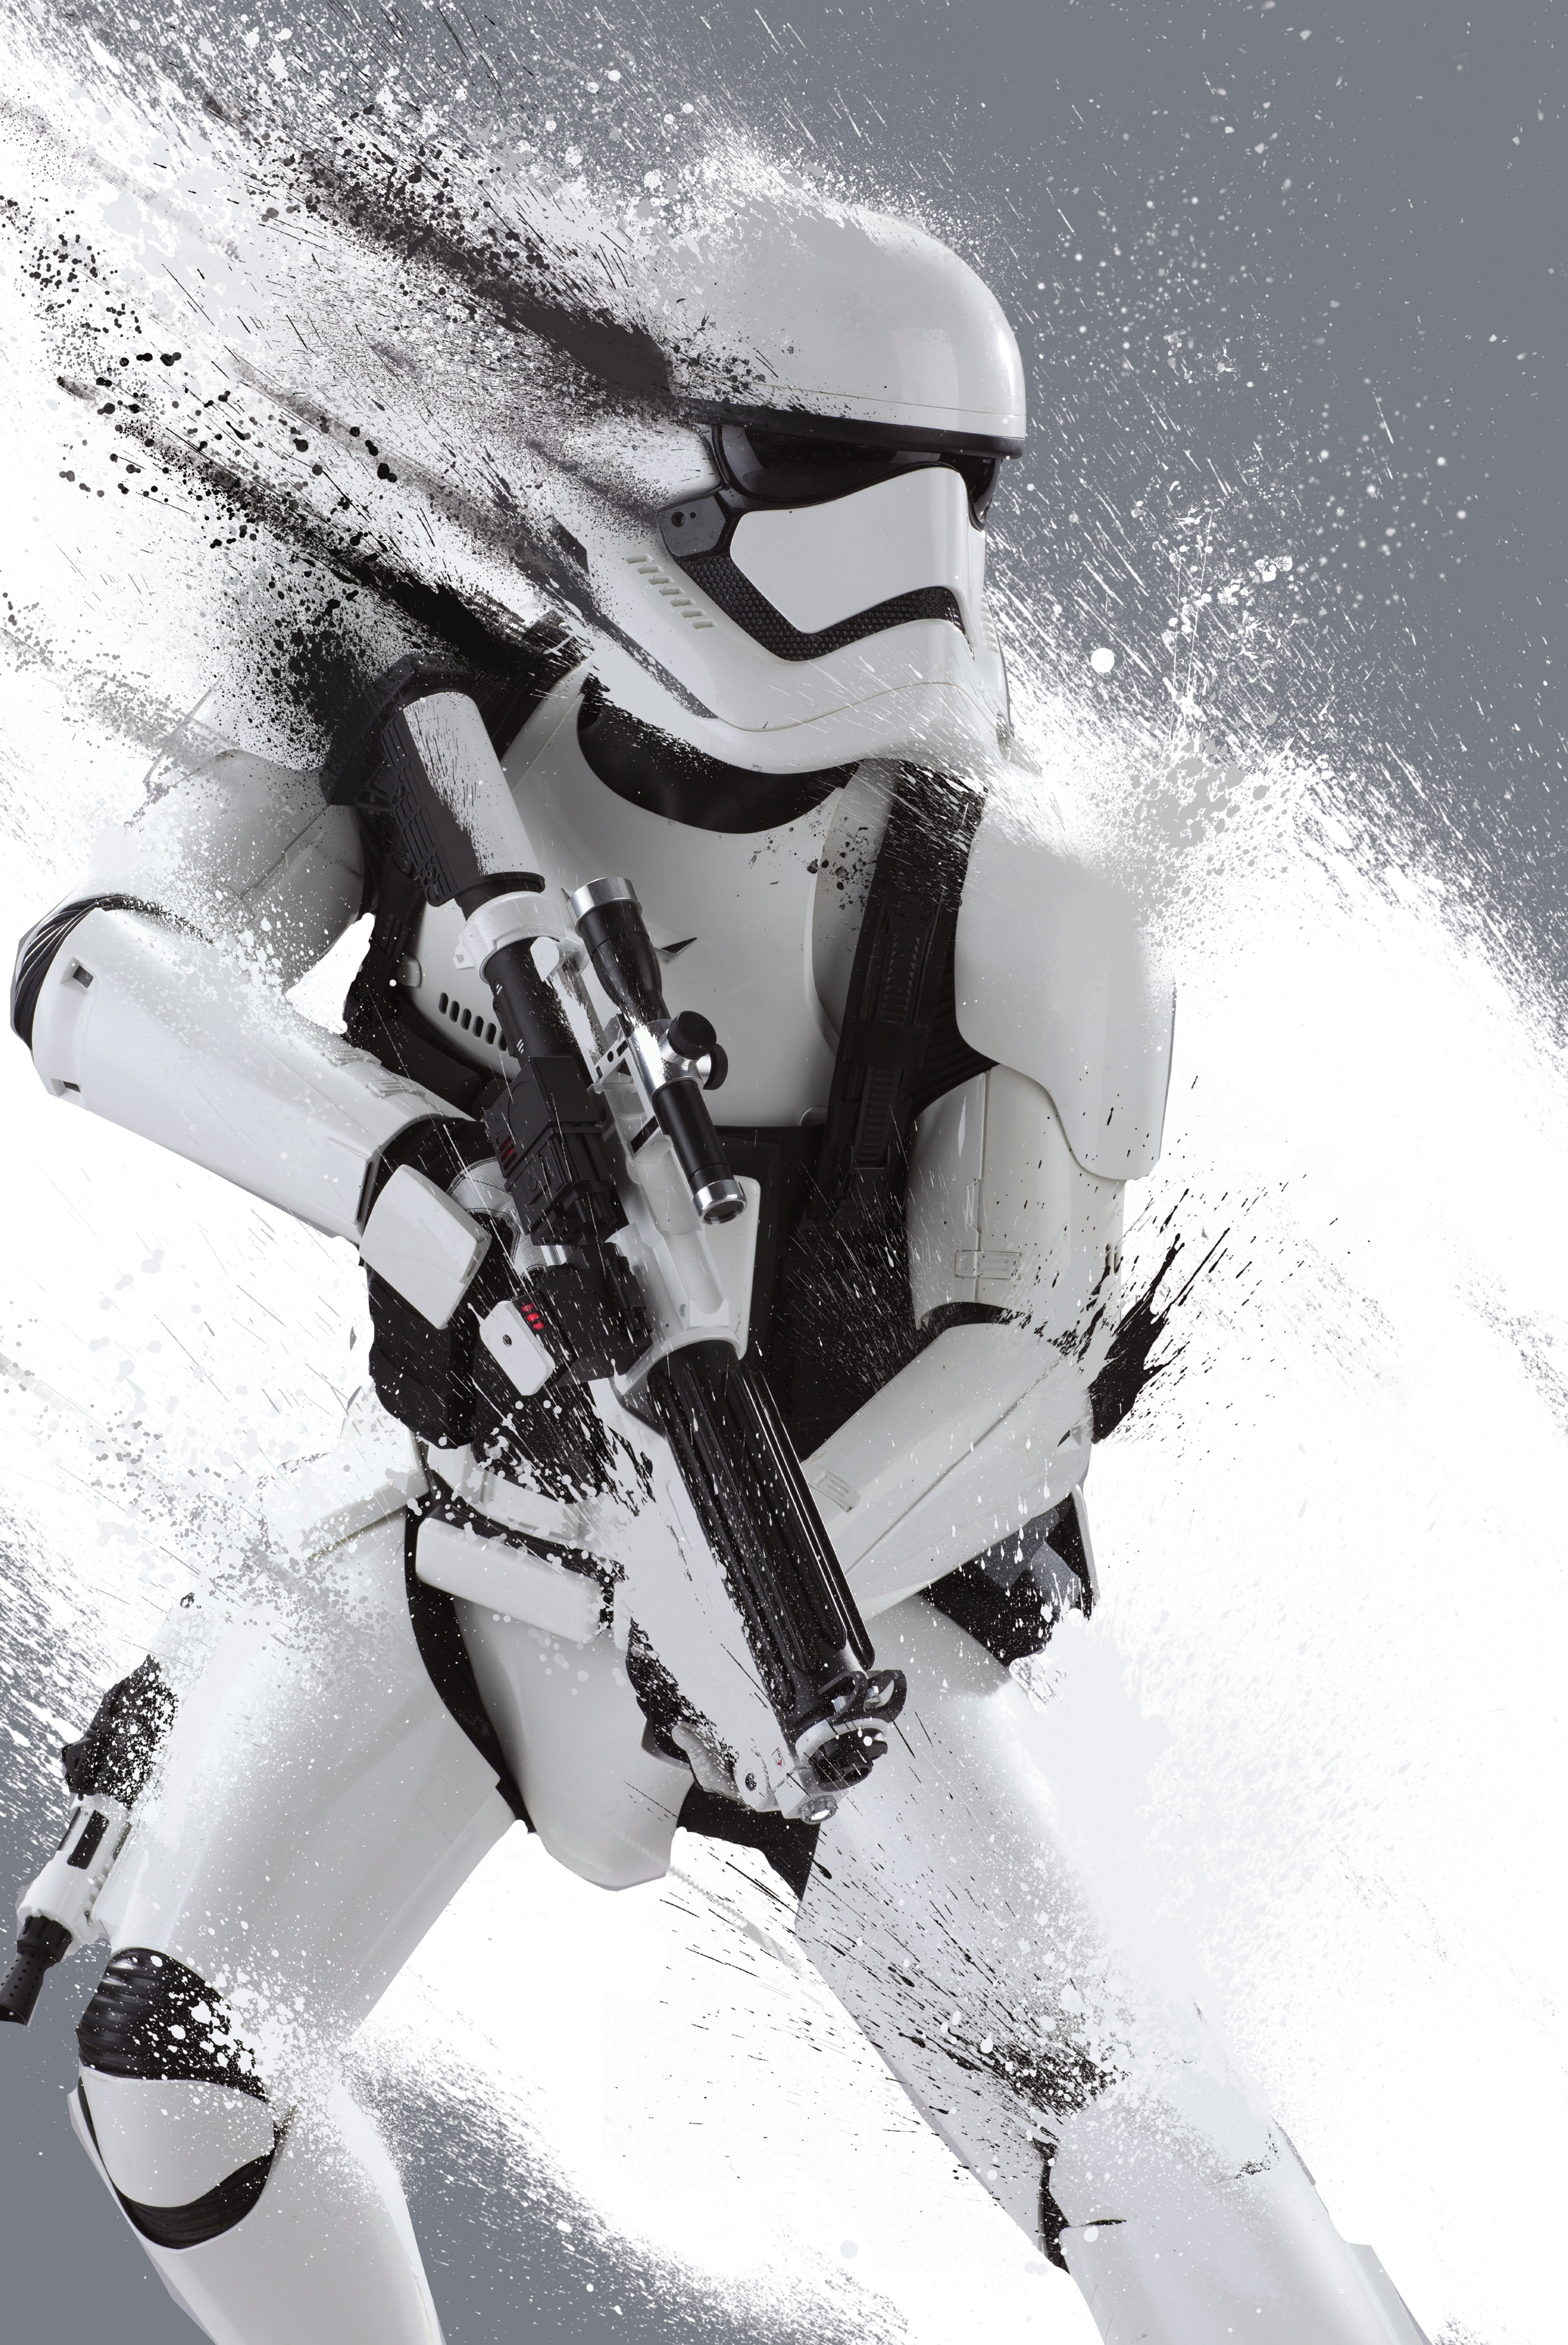 Star Wars Star Wars The Force Awakens Storm Troopers Stormtrooper Movies The First Order Blaster 6686x10000